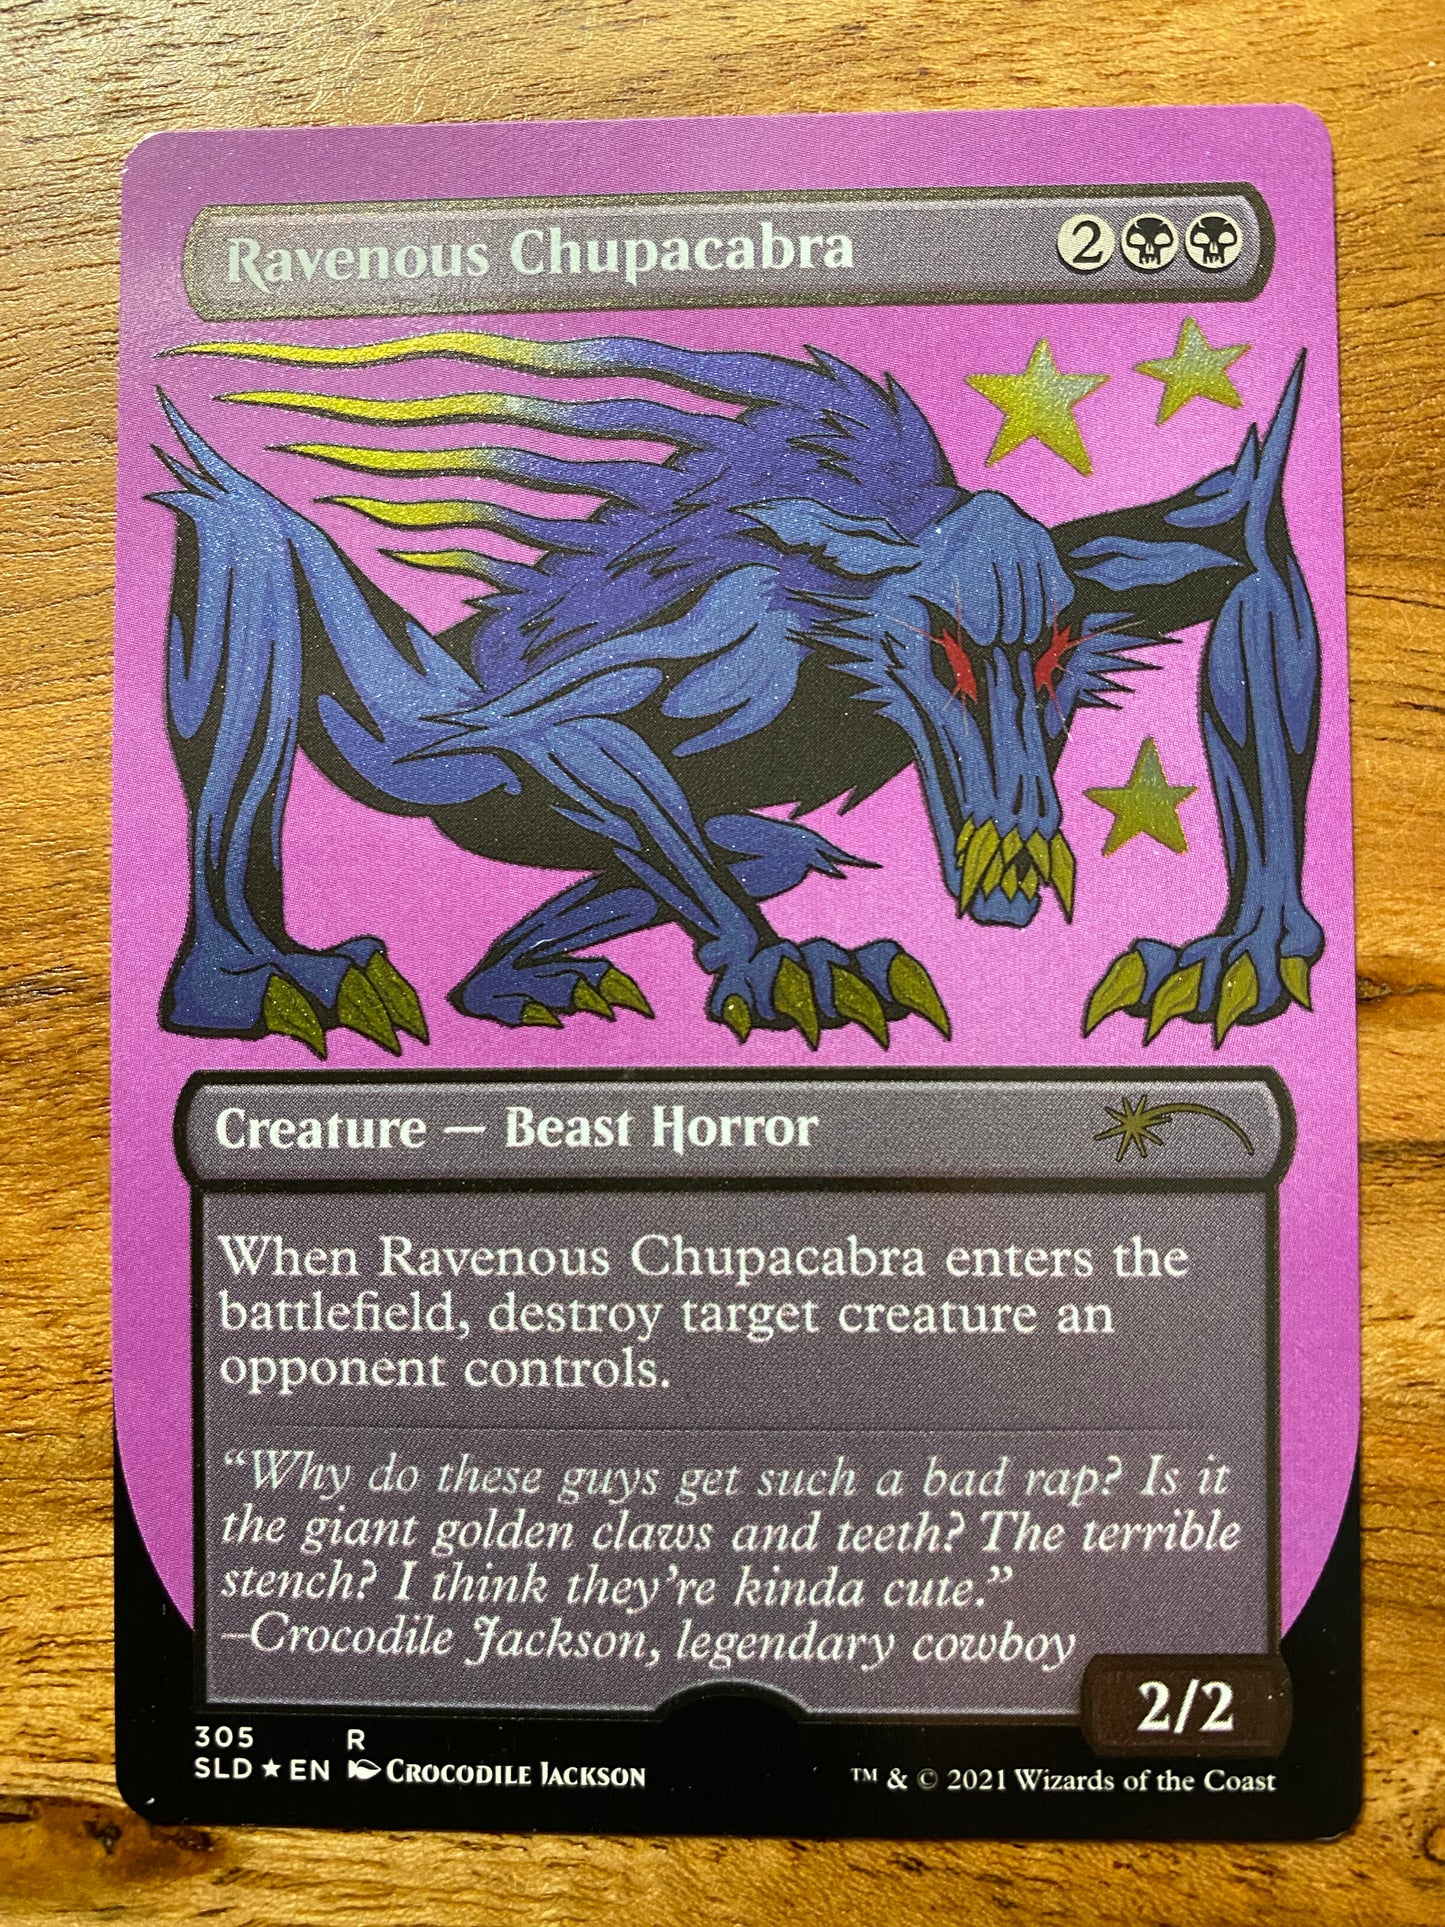 A shimmering trading card with a title at the top that reads Ravenous Chupacabra. Below that is a blue cartoon creature with red eyes and gold fangs and claws. Below the creature is the card information for the game - Magic the Gathering.